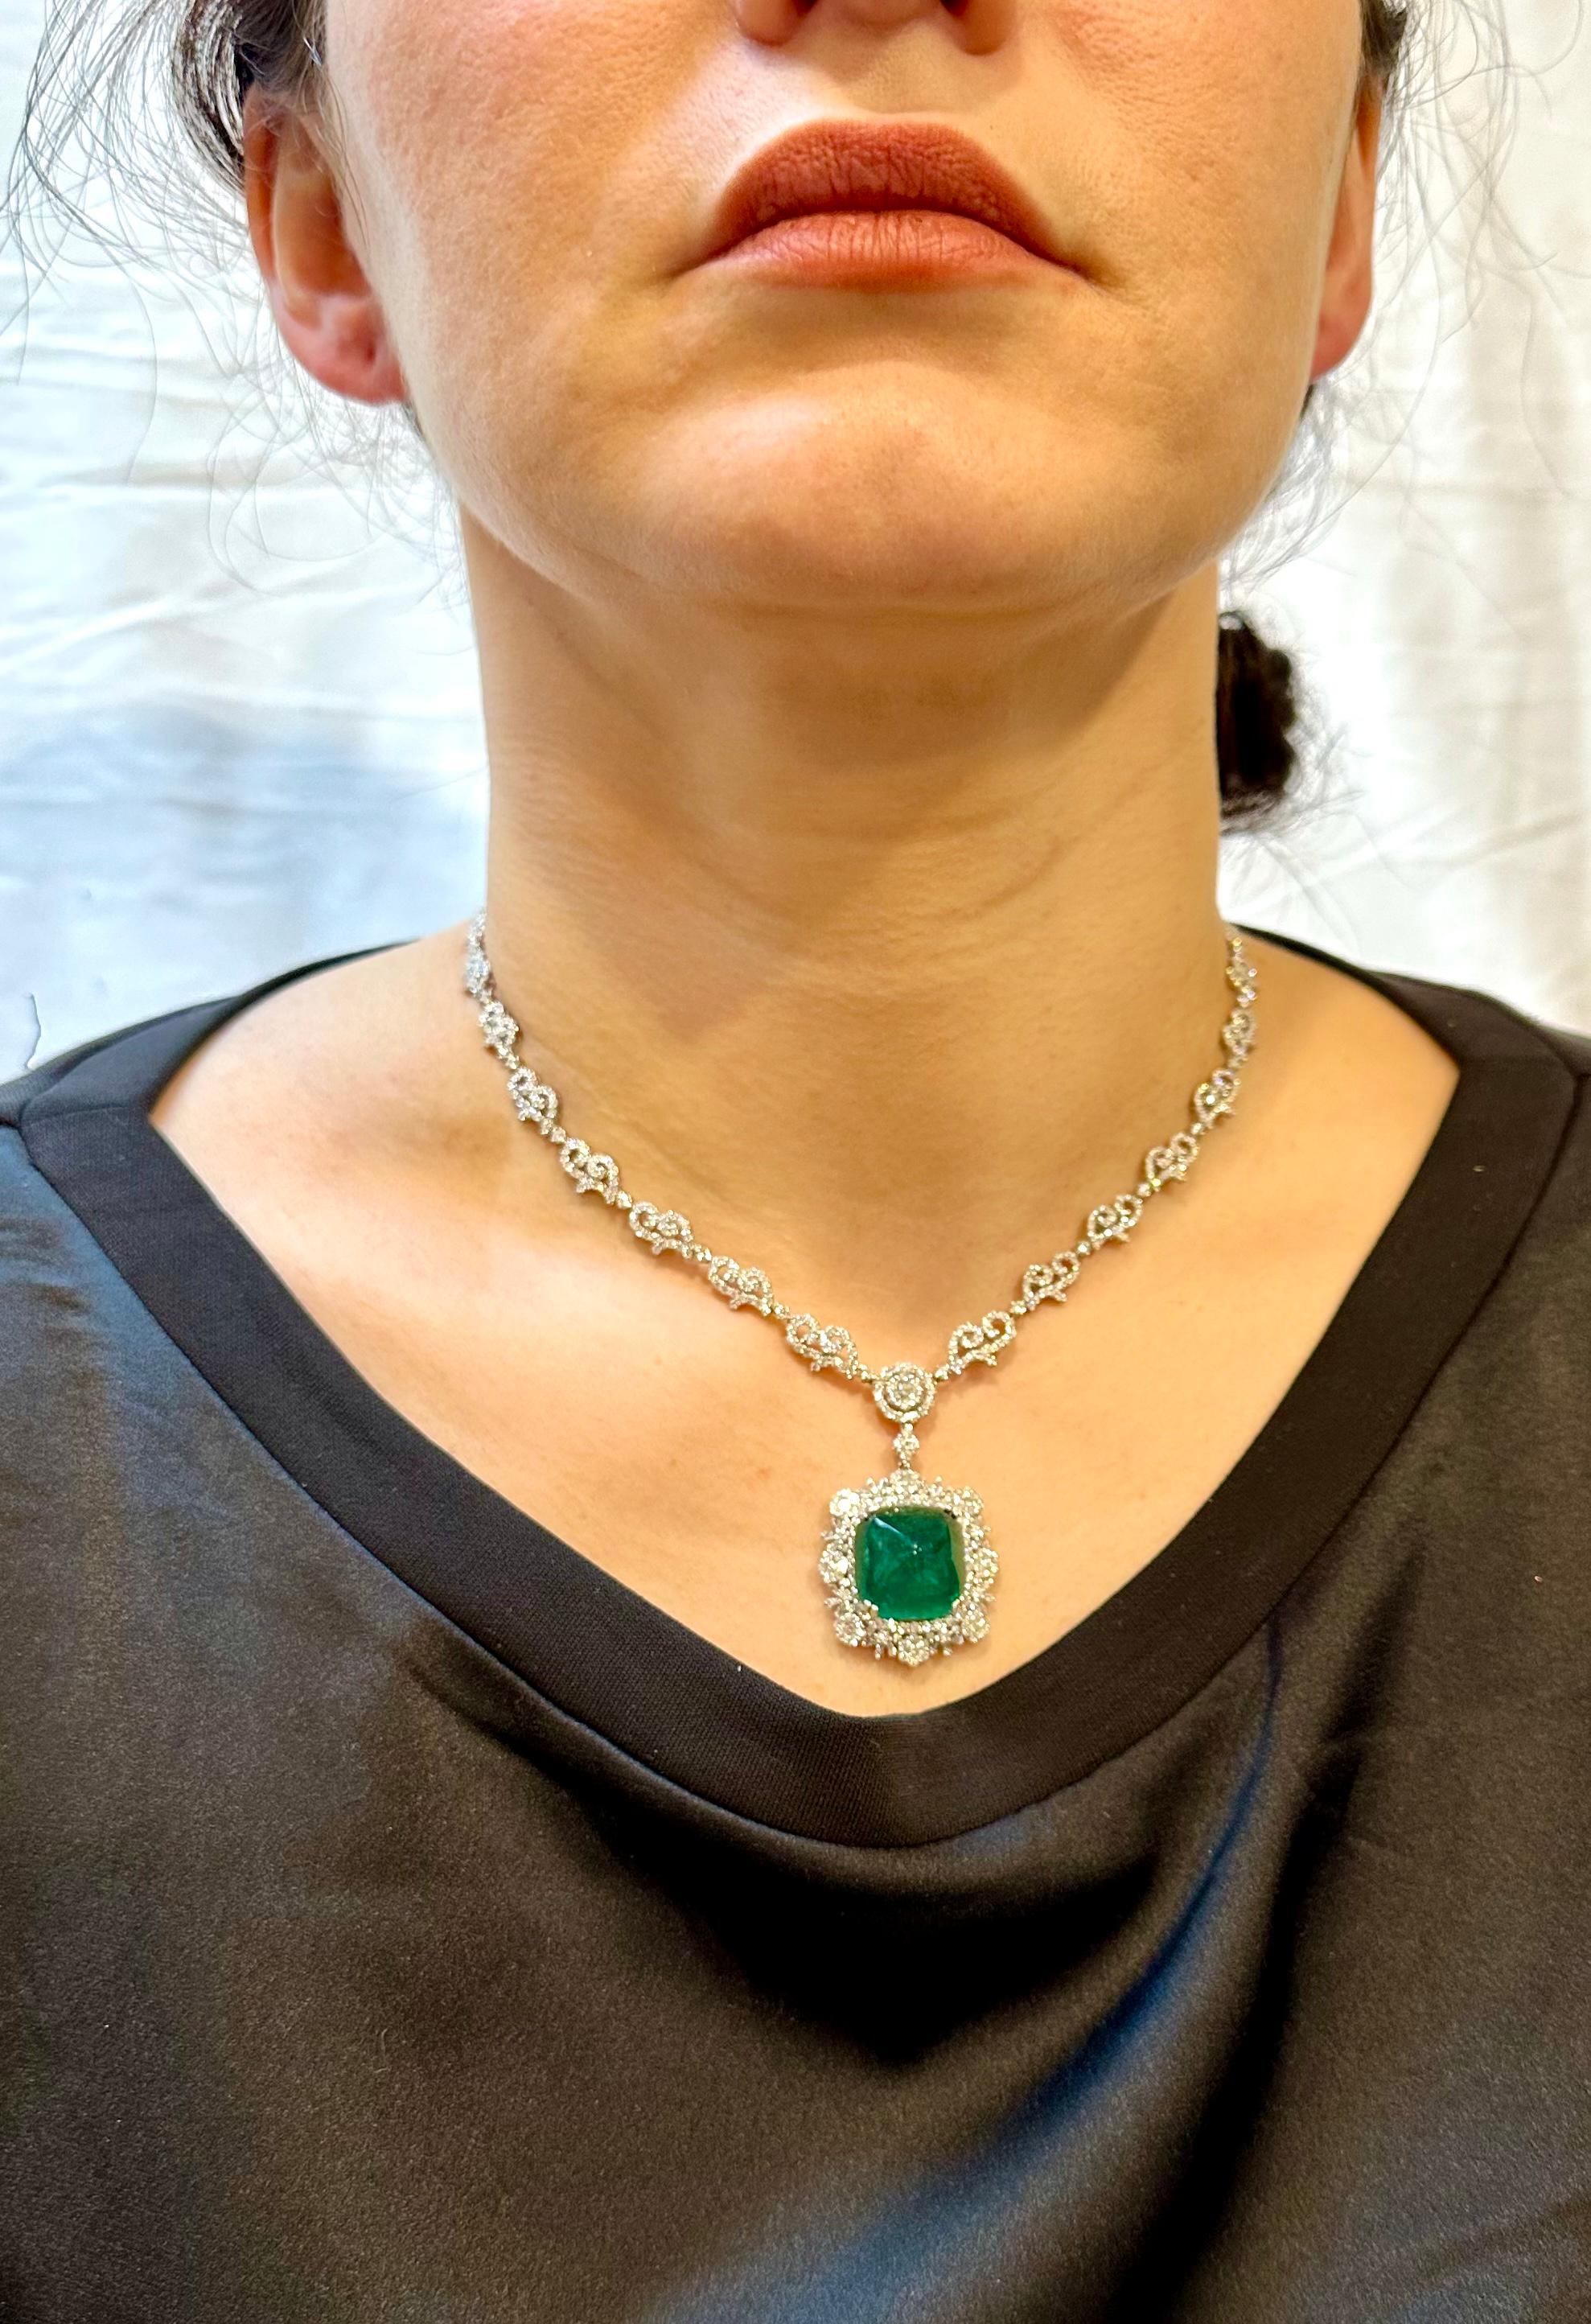 GIA 17 Ct Sugar Loaf Cabochon Colombian Emerald & 13 Ct Diamond Necklace 18KWG For Sale 7